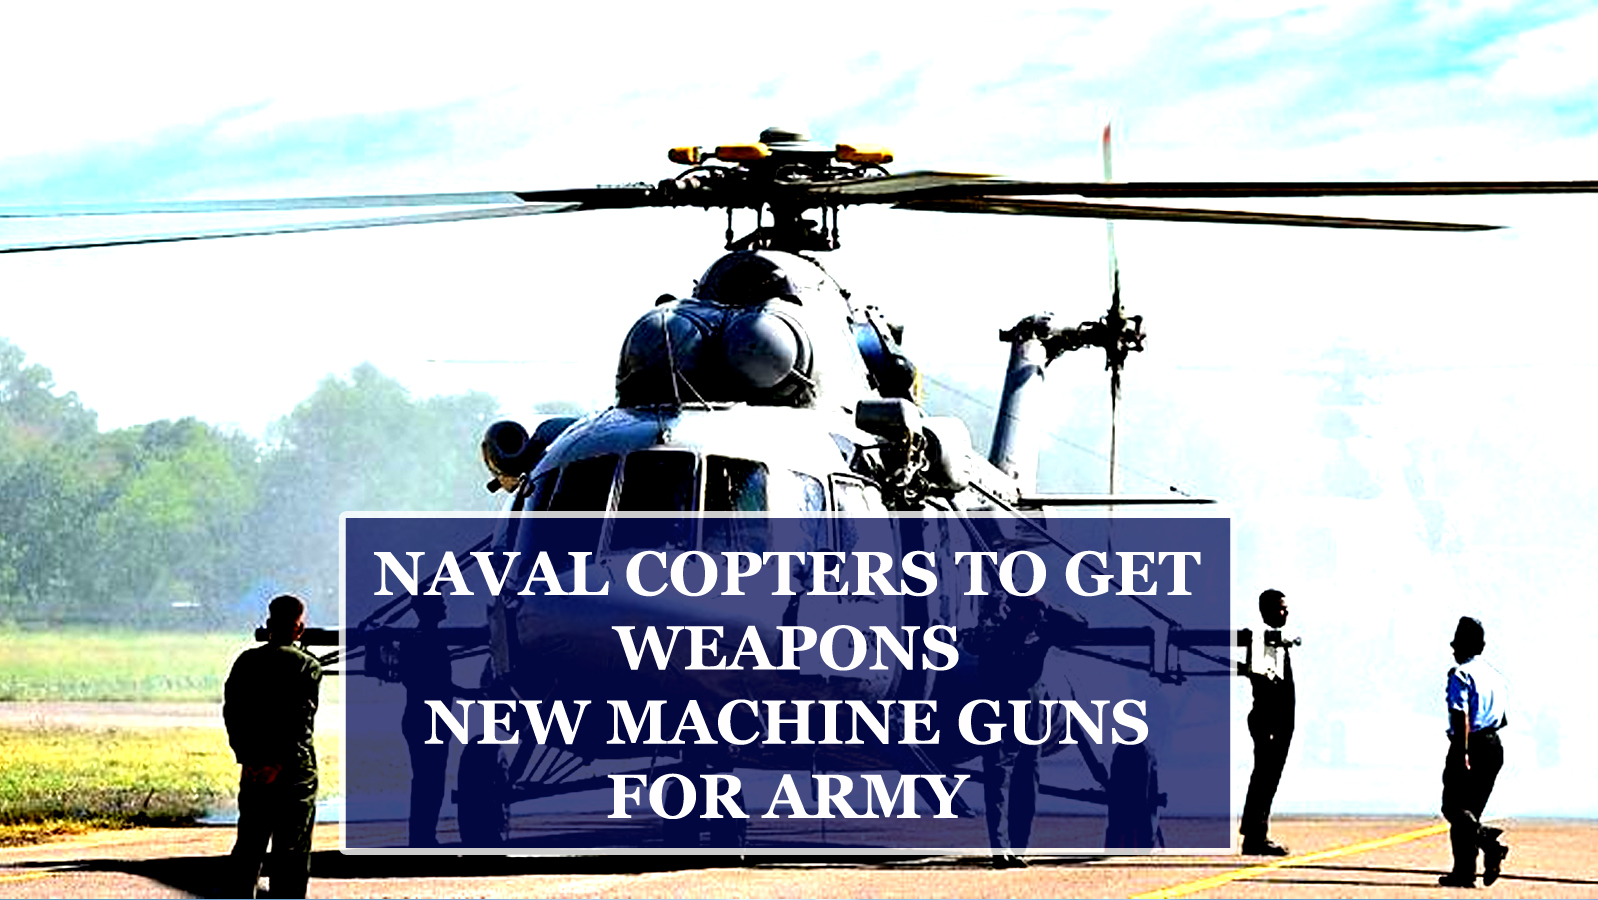 NAVAL COPTERS TO GET WEAPONS